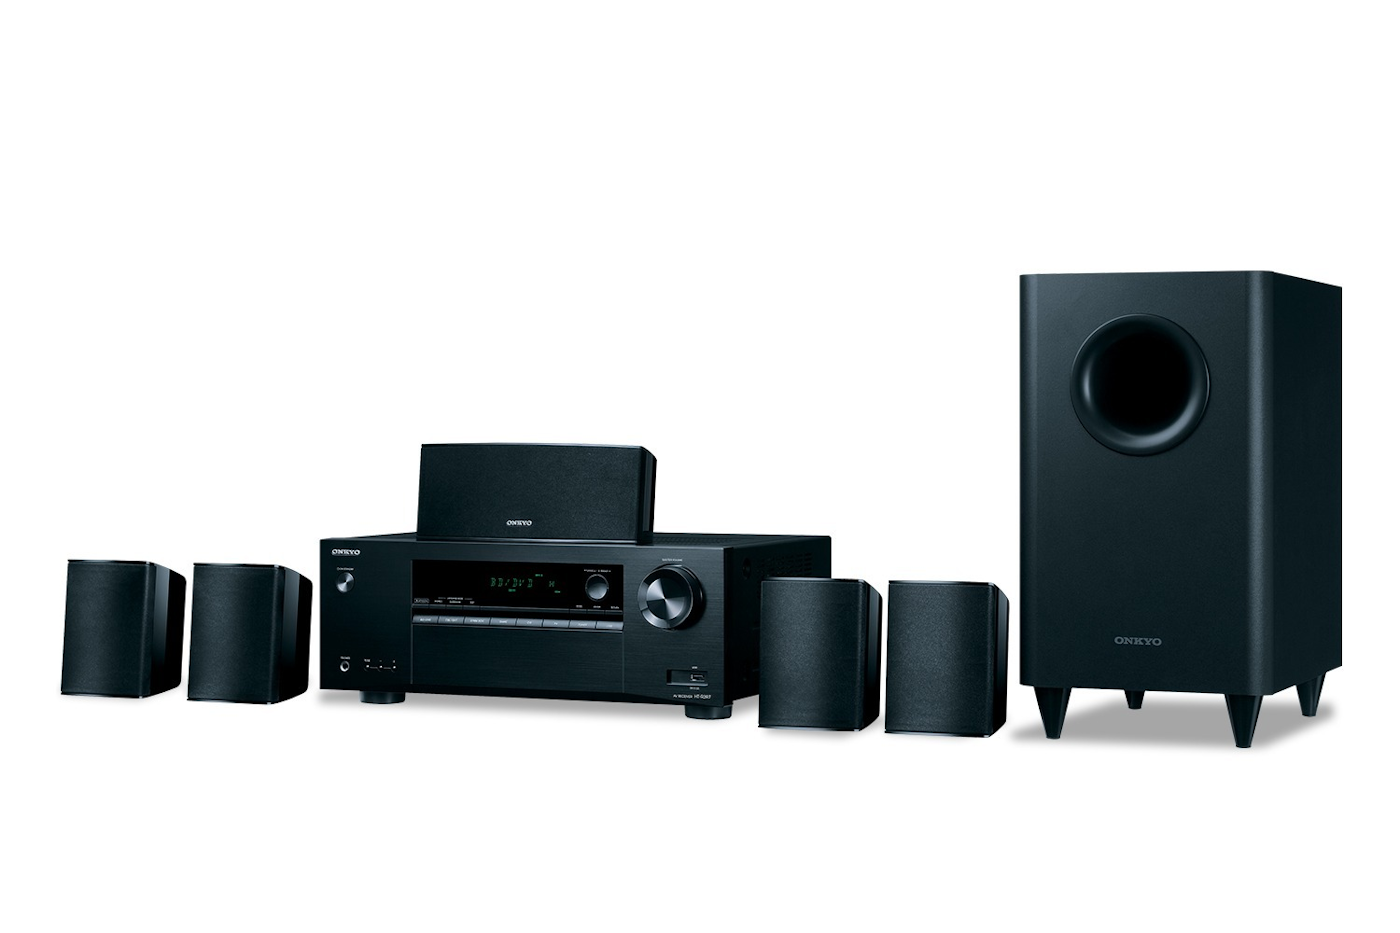 onkyo ht-s3900 home theater system on white background